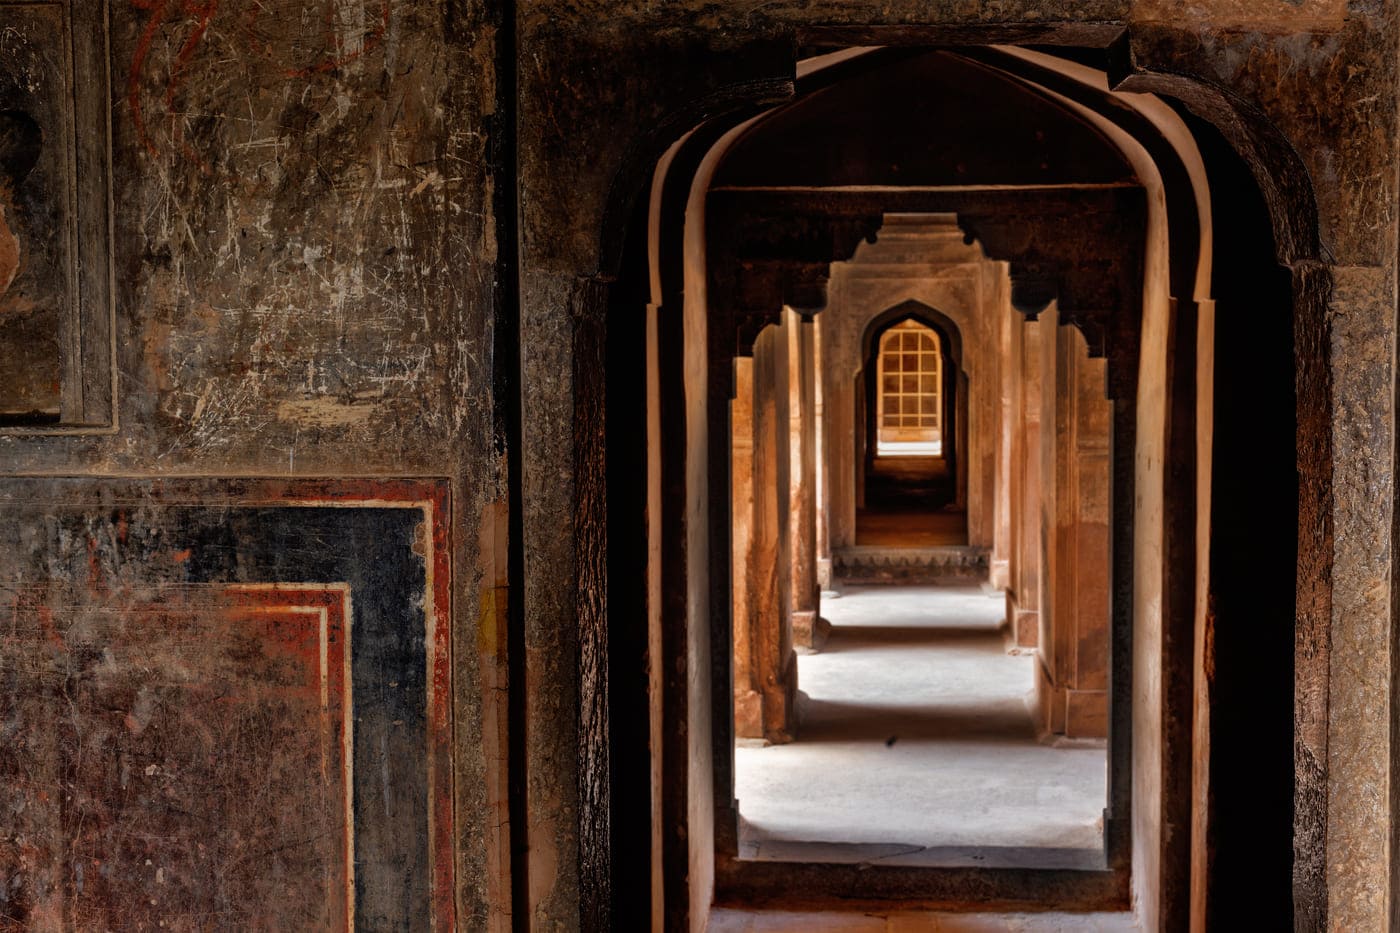 A shot of the perfectly architectured doorways that fall perfectly concurrent to each other at the Datia Palace, also known as Purana Mahal - meaning Old Palace - by locals, Madhya Pradesh 